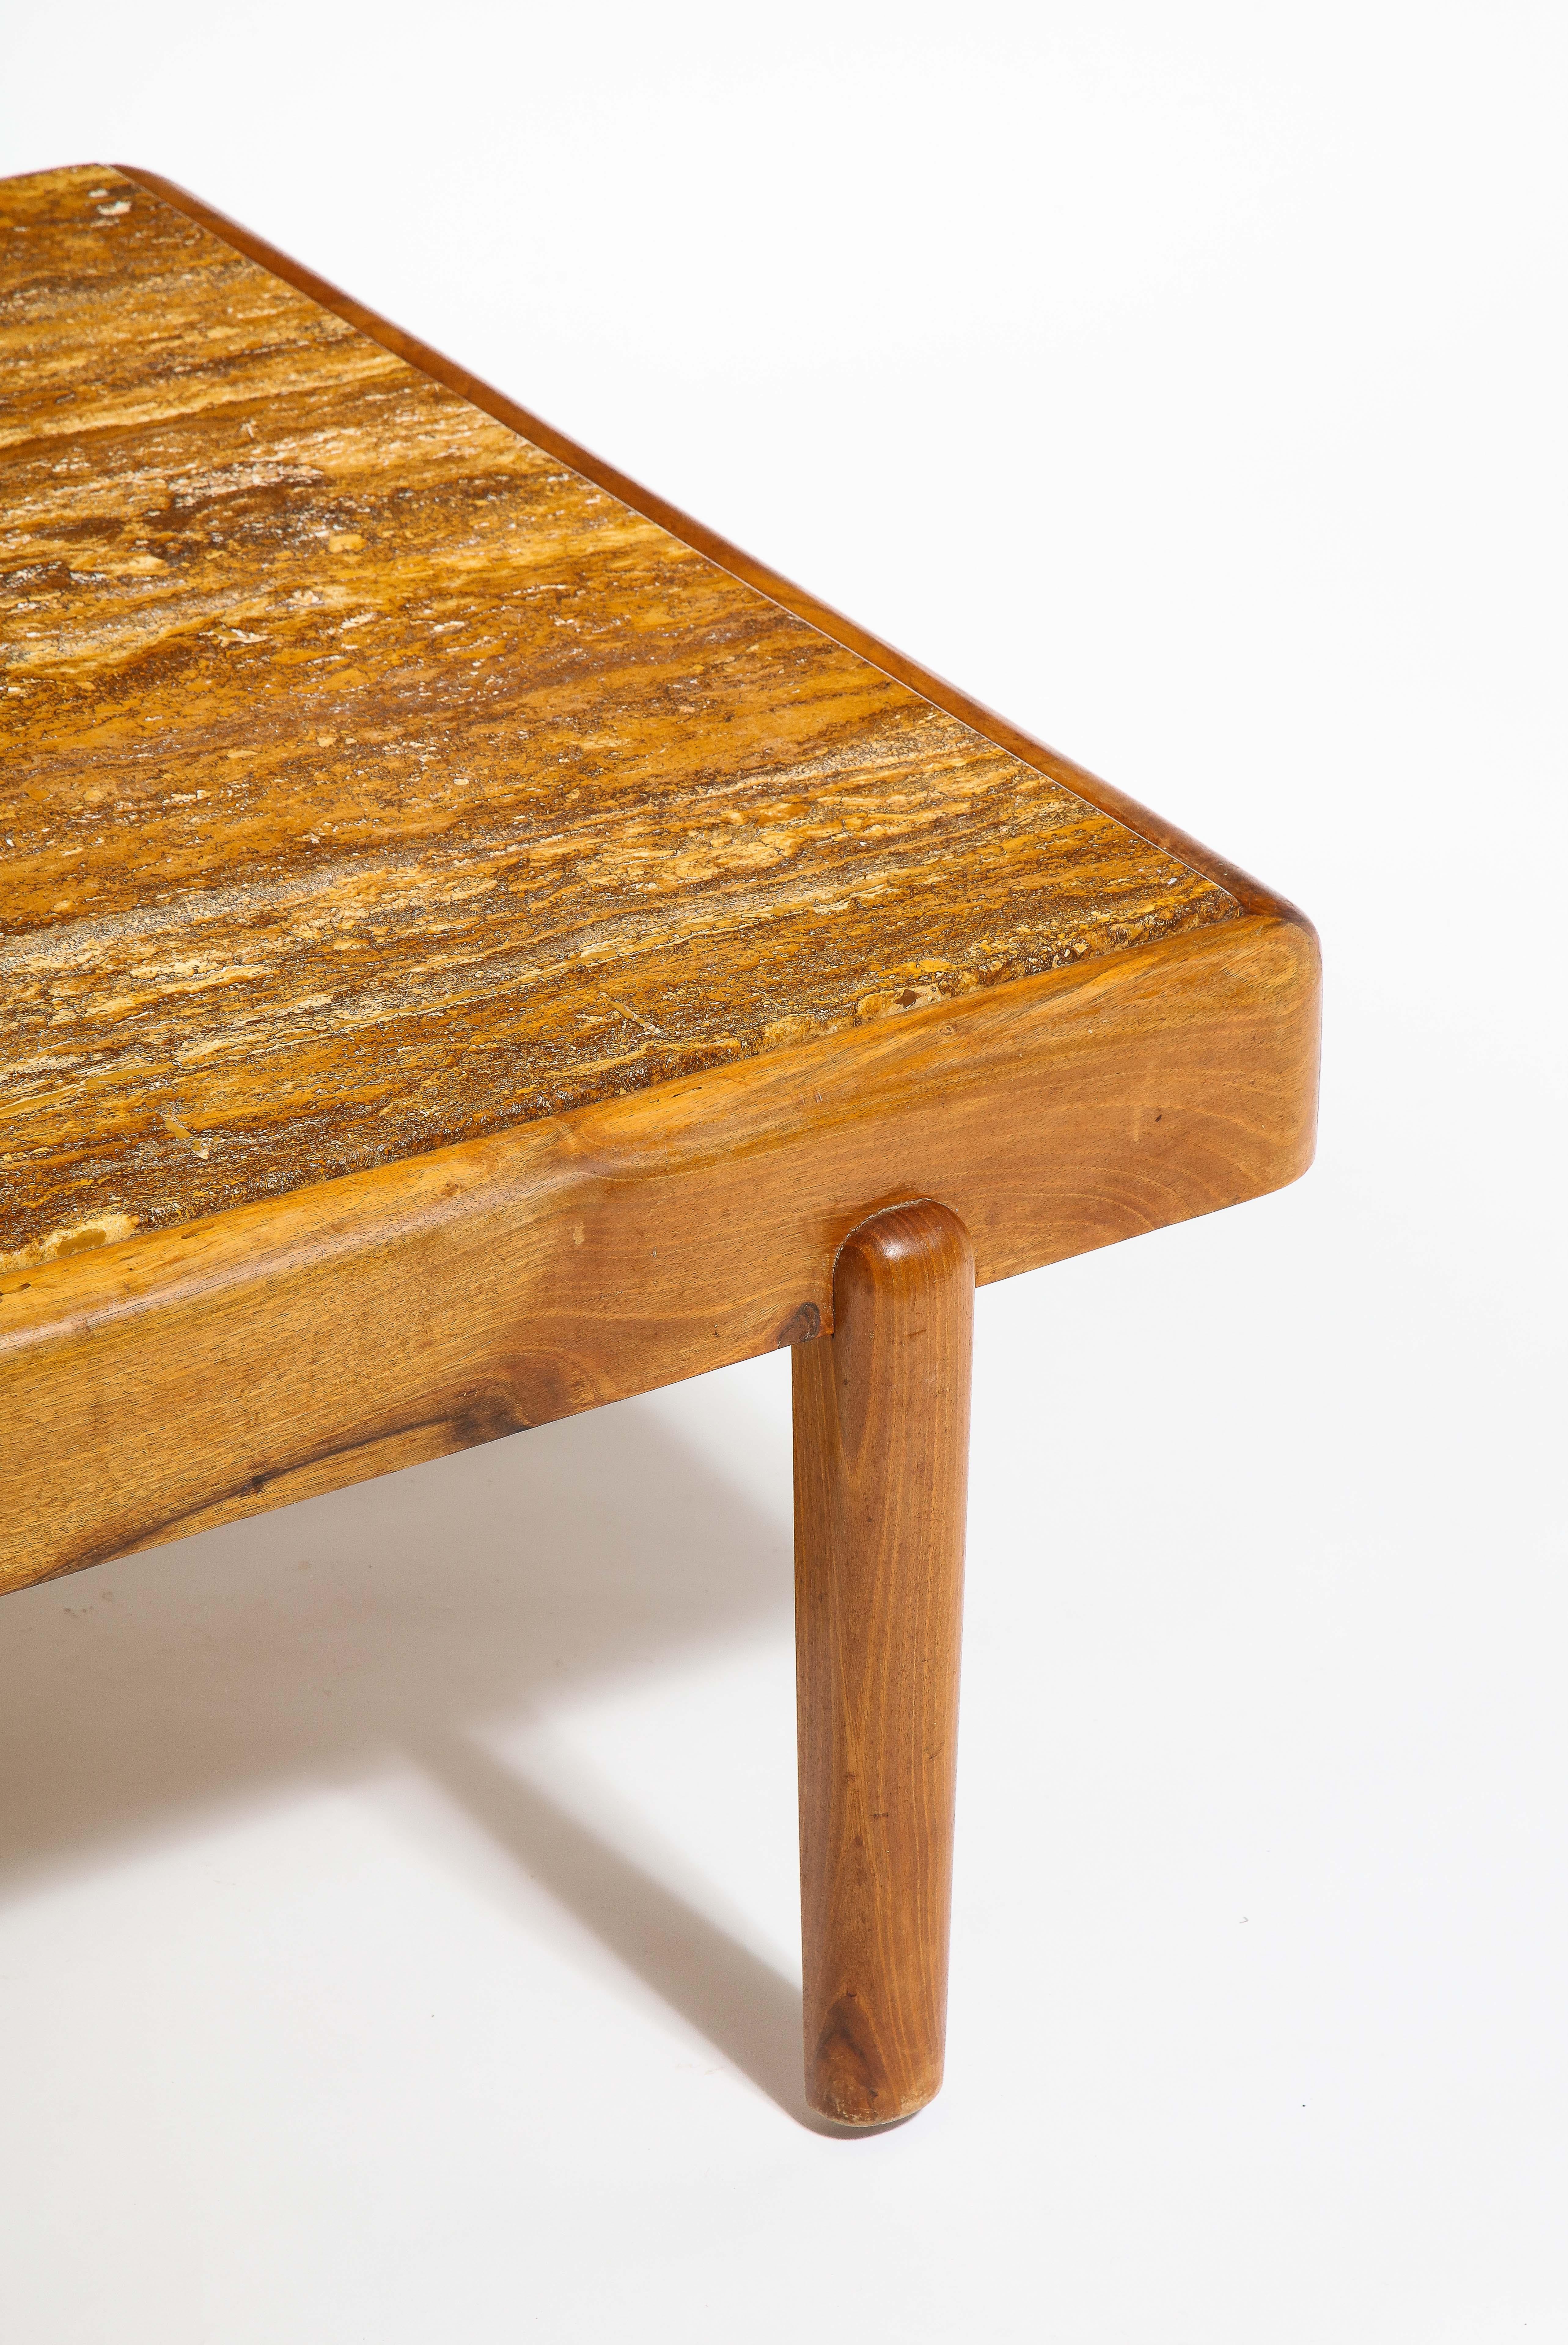 20th Century Large Elm & Travertine Coffee Table, France 1960's For Sale